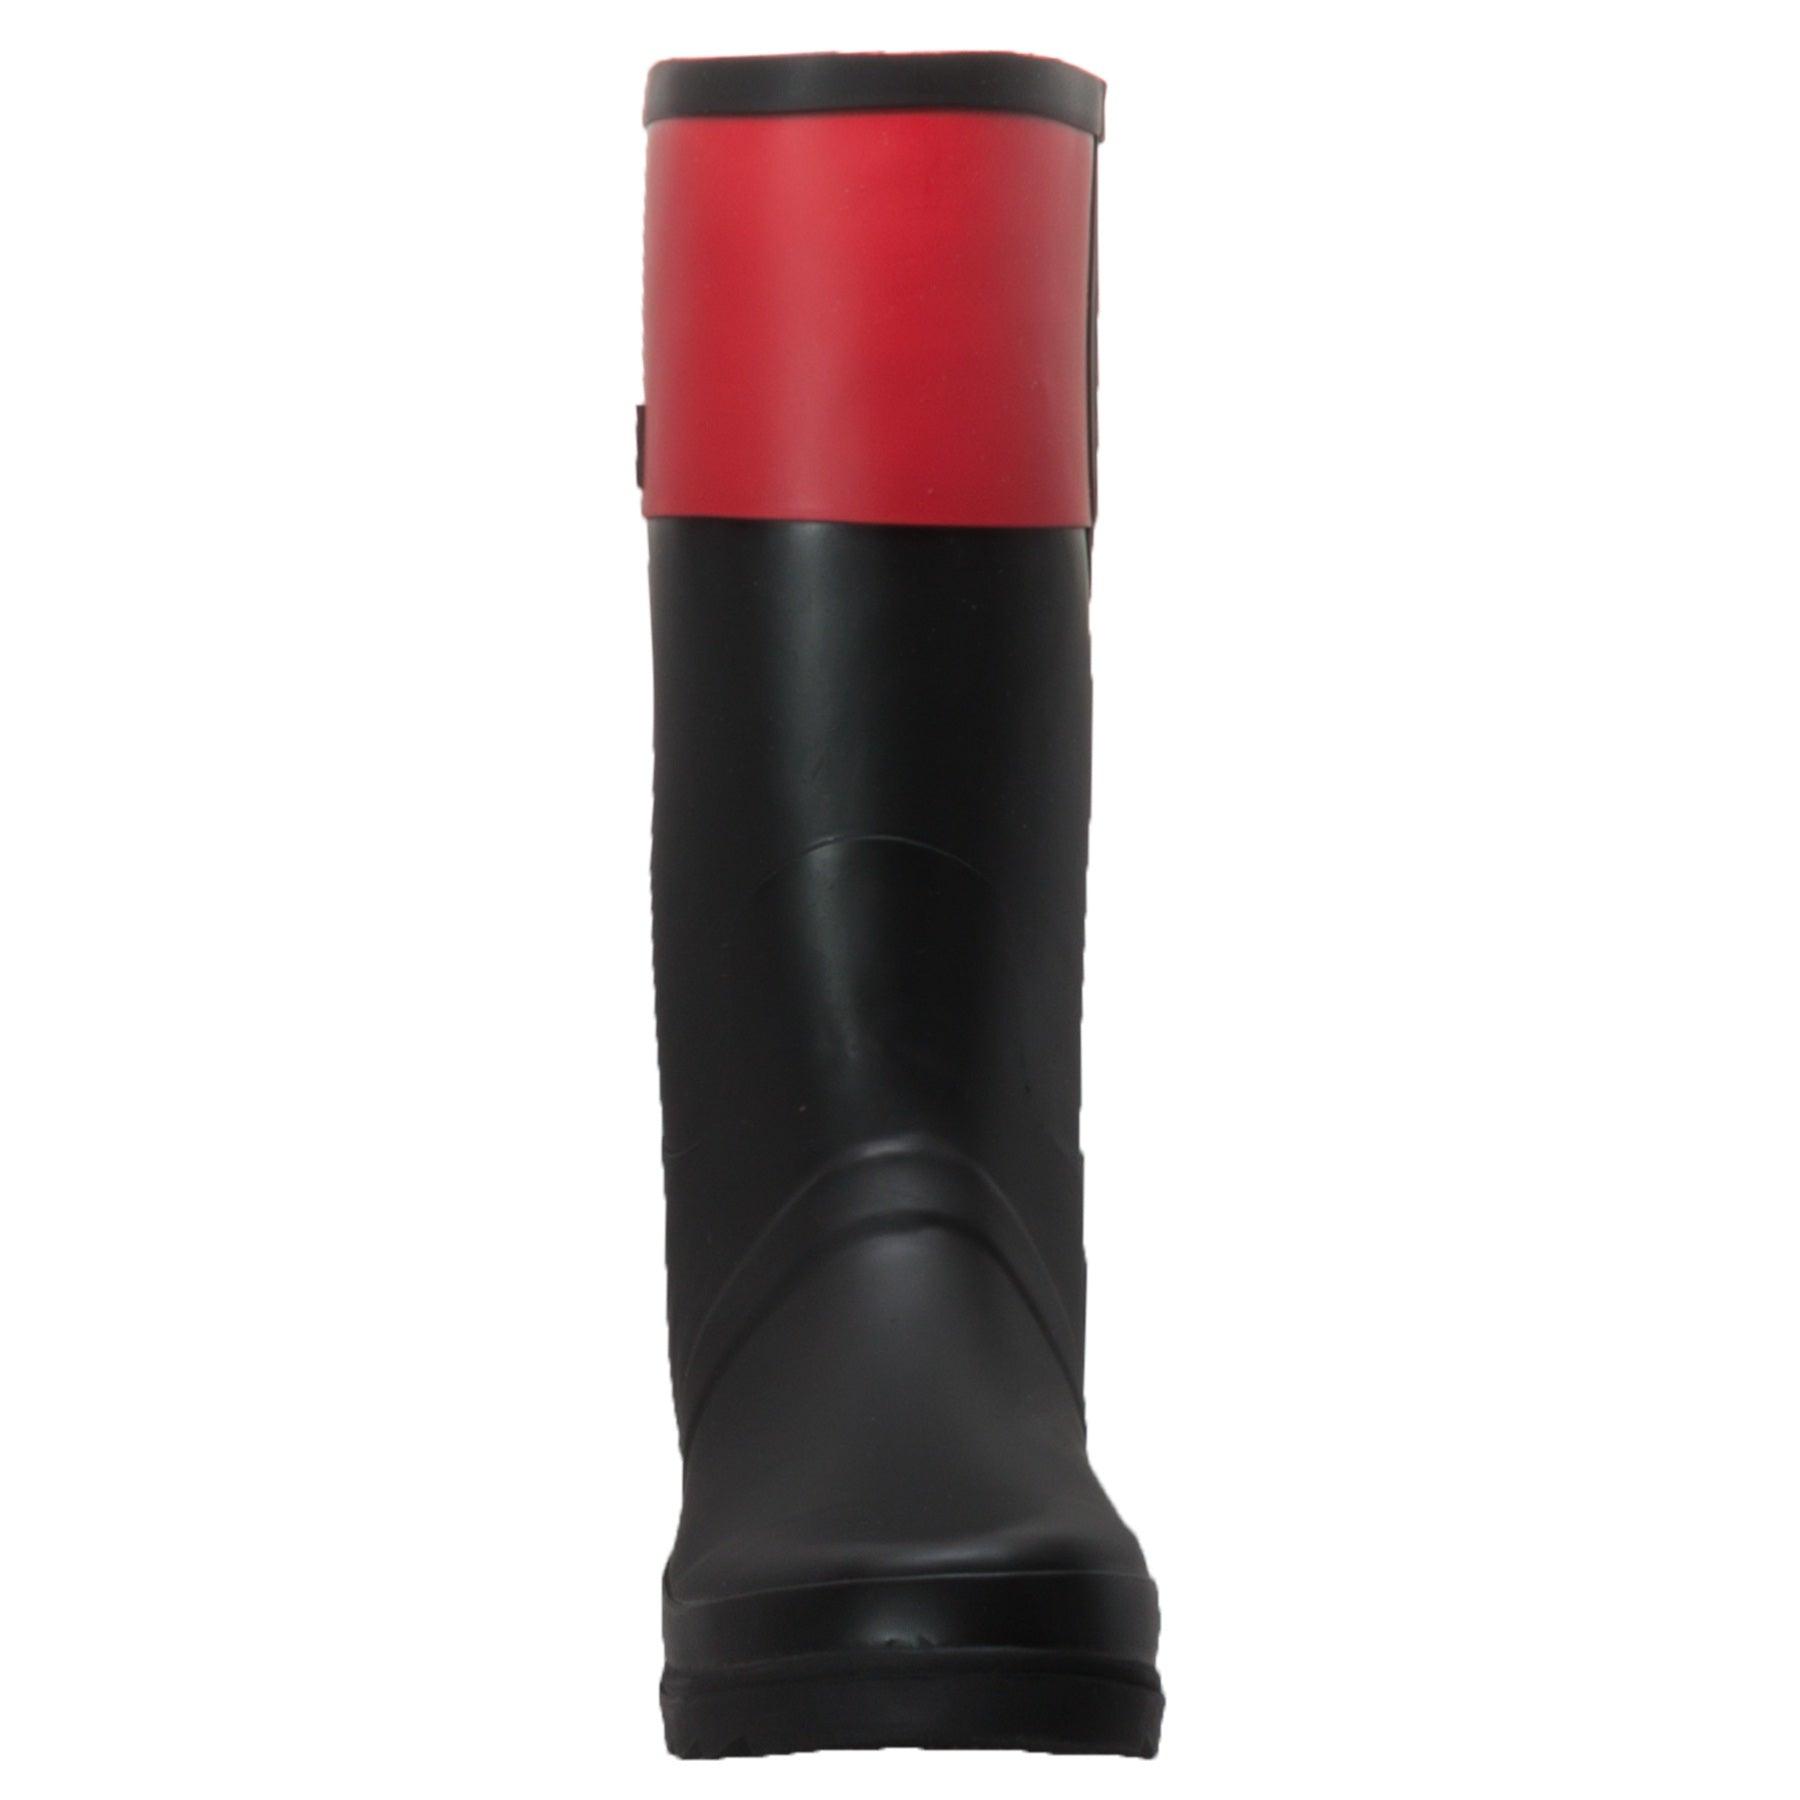 Case IH Women's Rubber Rider Boot with Red Cuff Black - Flyclothing LLC